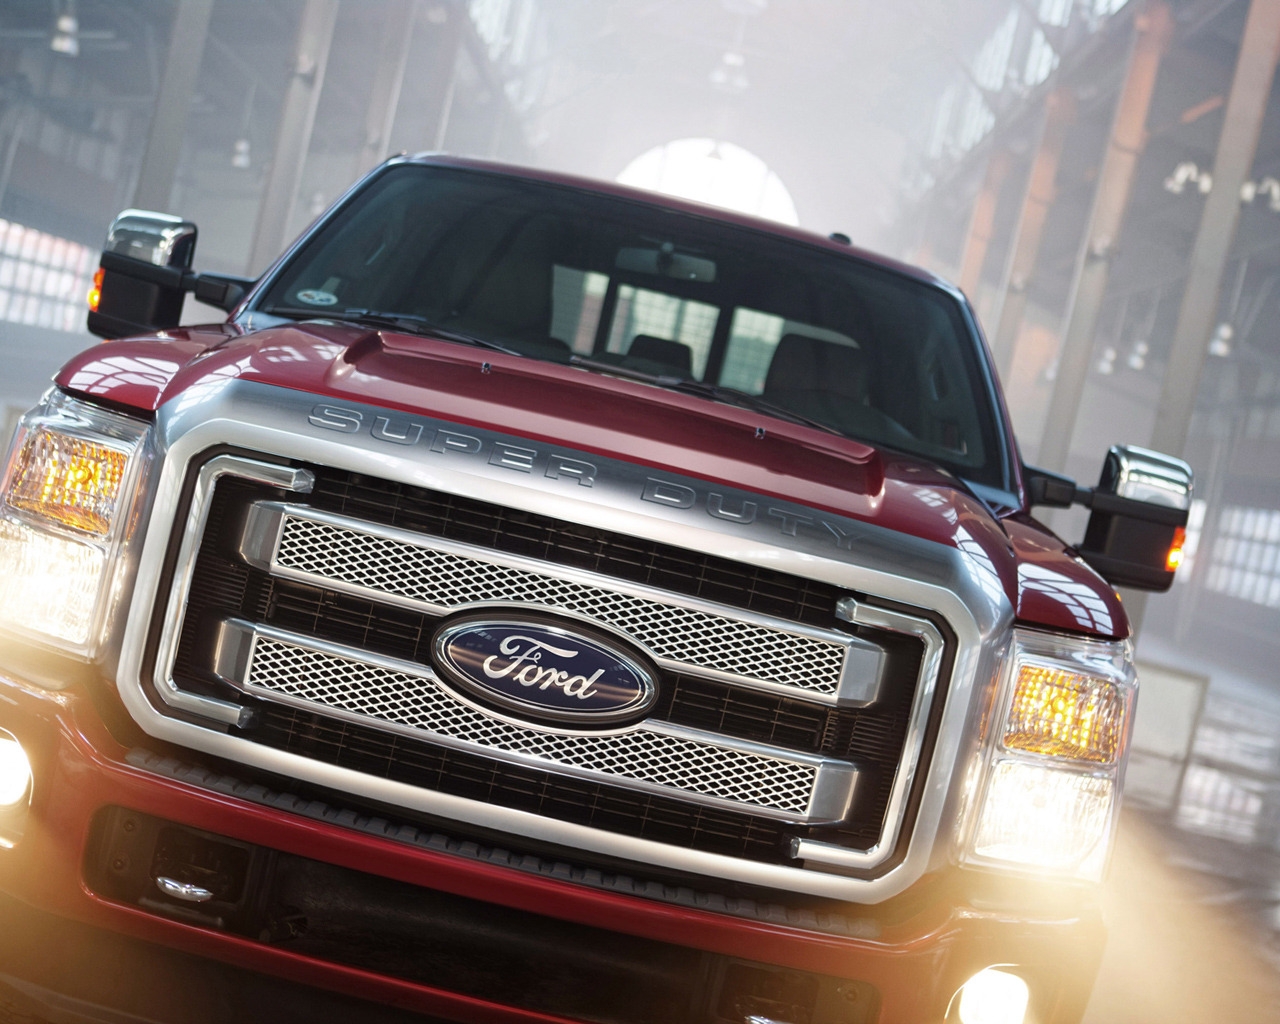 Ford Super Duty Platinum Front for 1280 x 1024 resolution